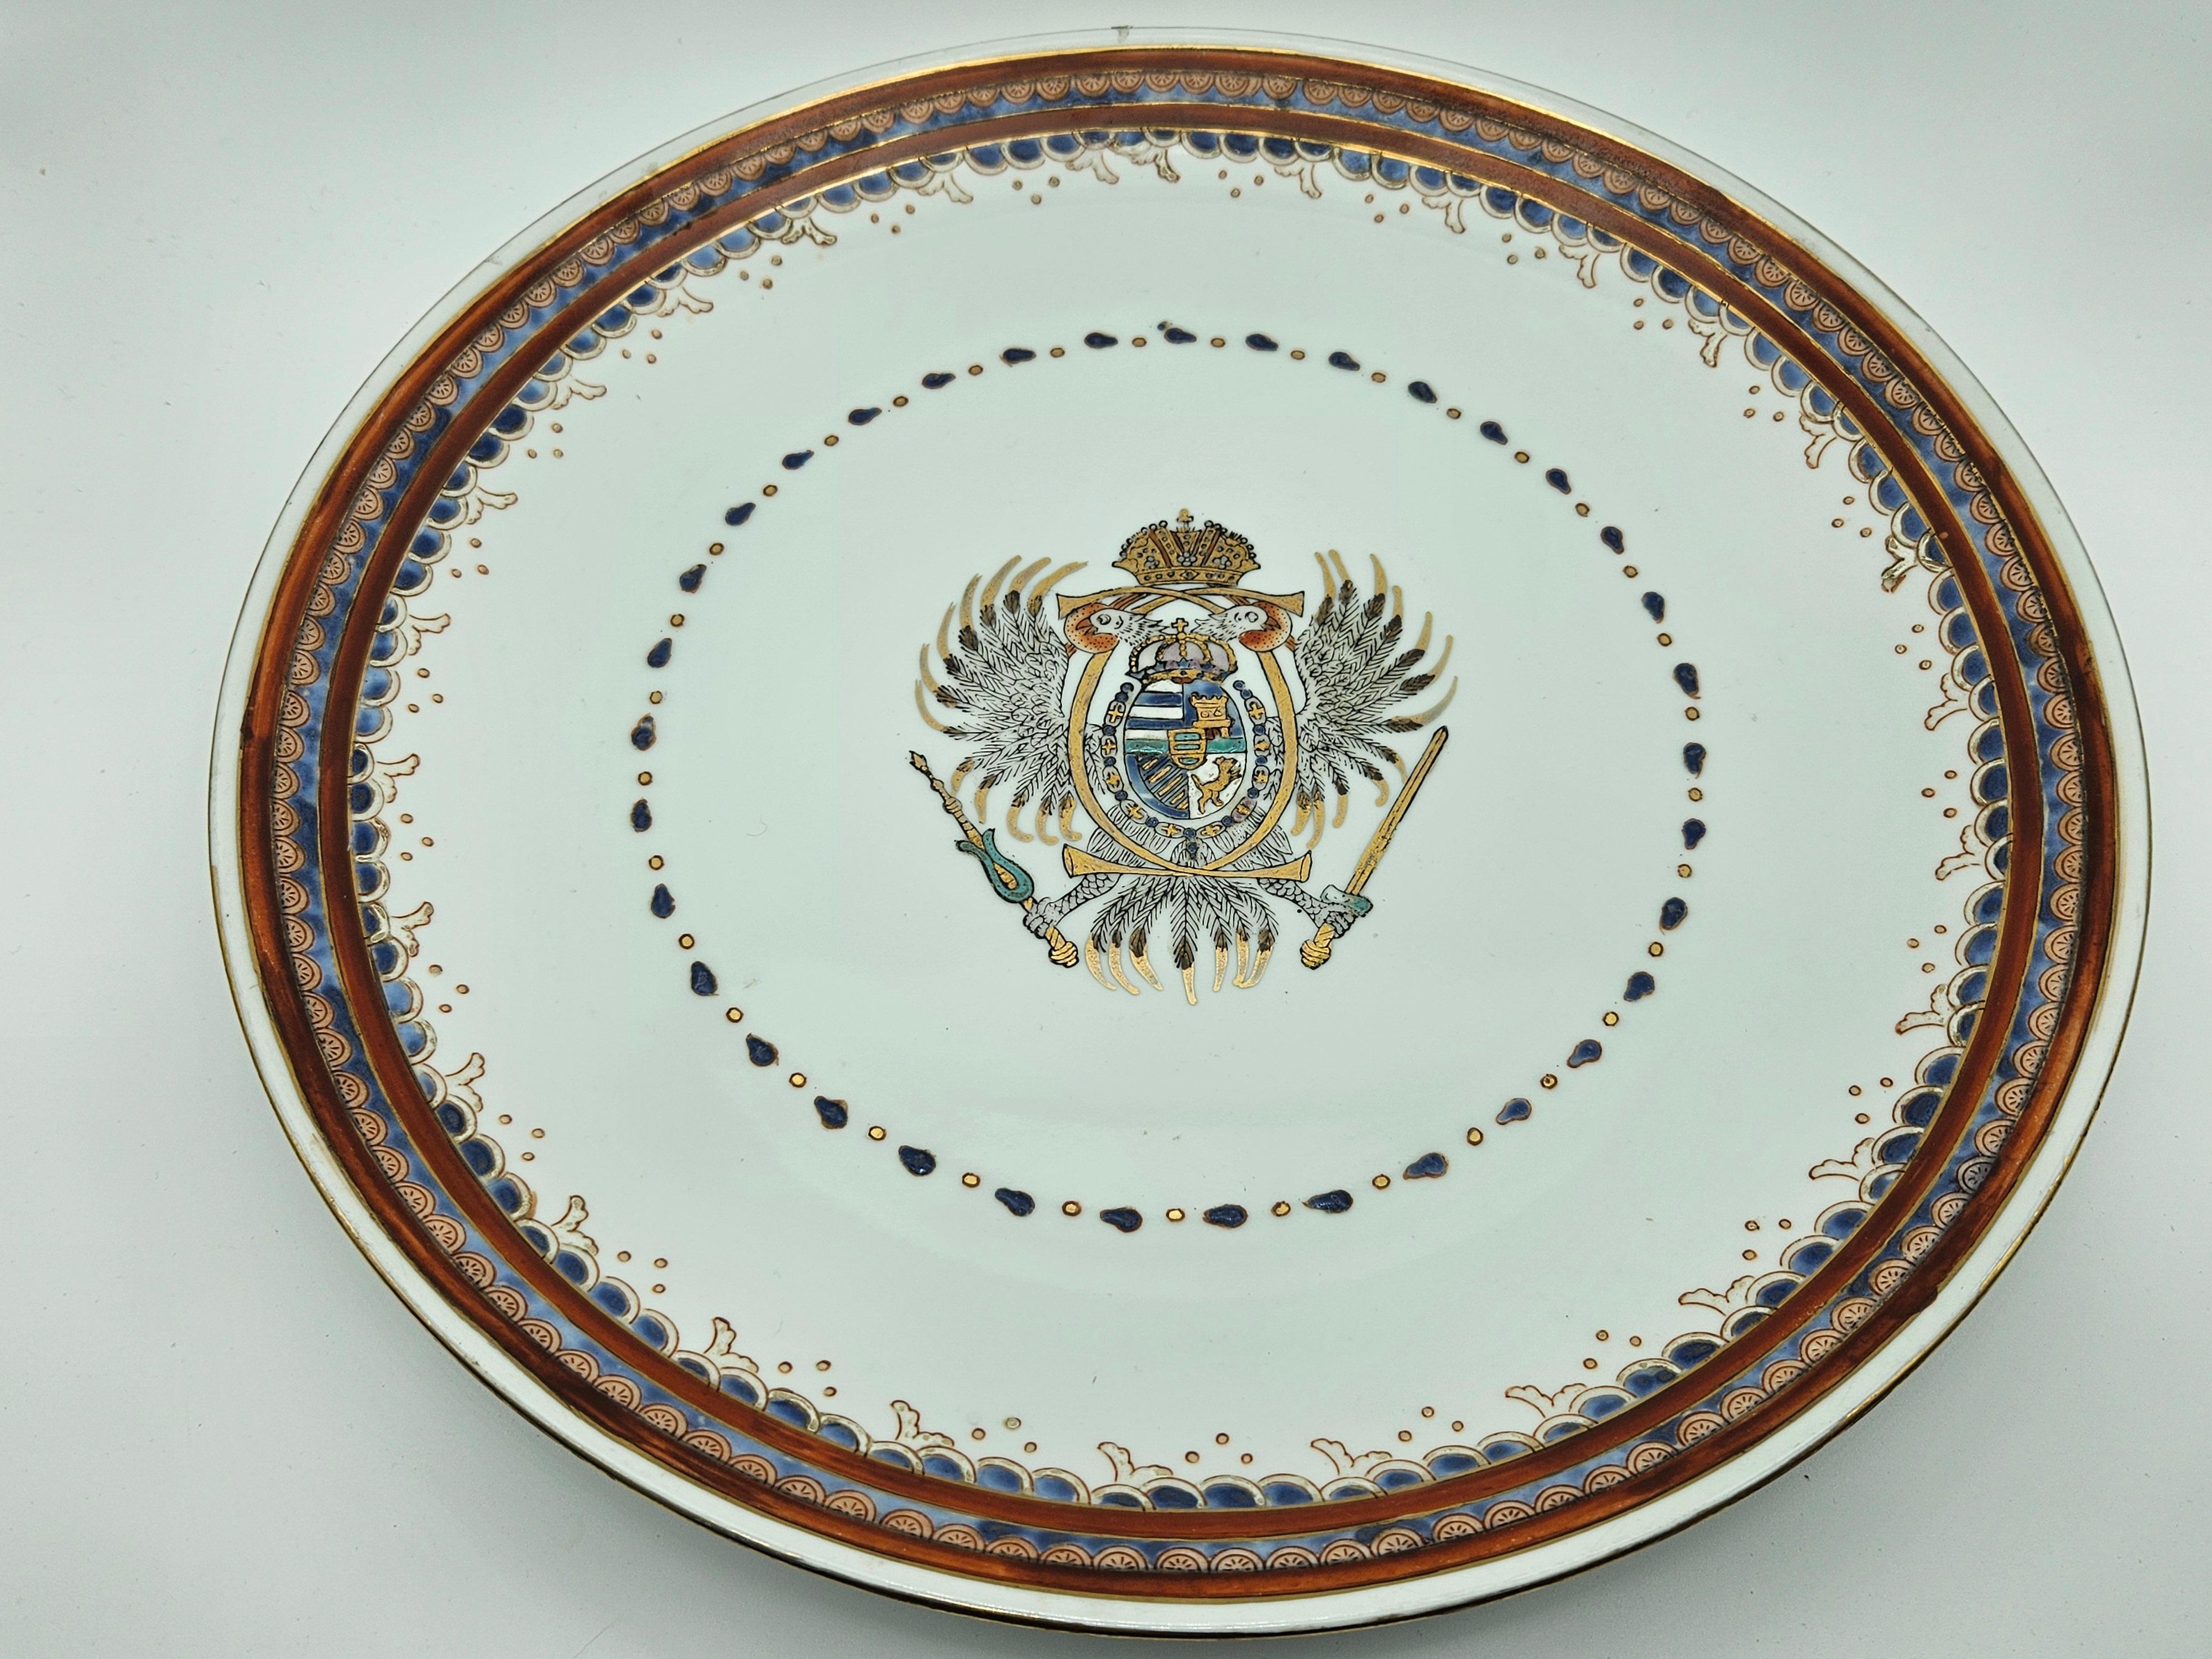 Pair of plates with polychrome decoration and raised rim.
Early 20th century European production.

They show normal signs of wear due to age and use.